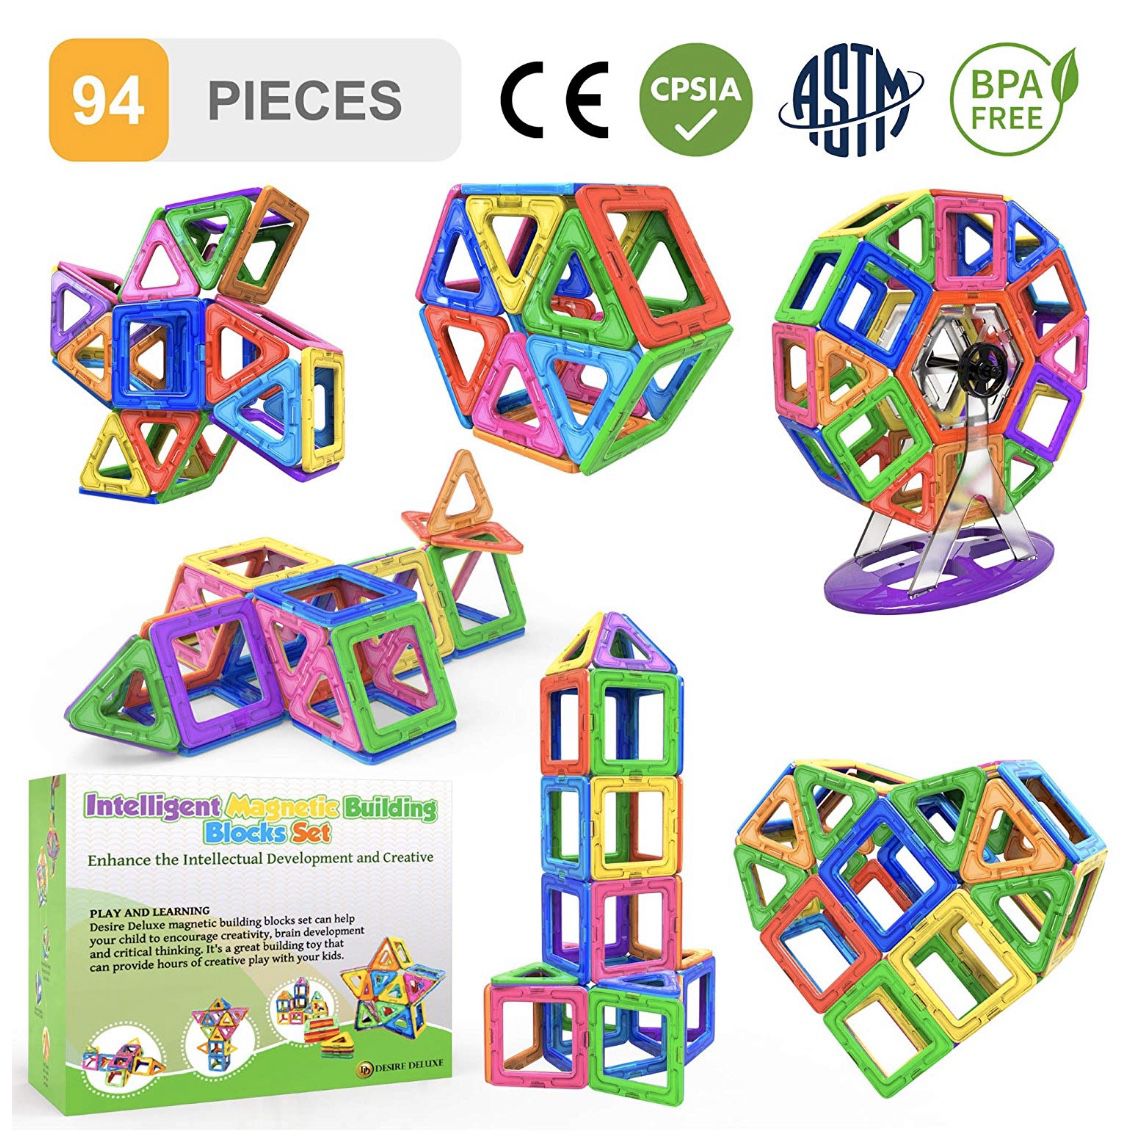 Magnetic Blocks Building Tiles STEM Toys Set (94pc ) – Children Creativity Educational 5 Year Old Boy Gifts for Kids Magnet Construction Toy for Girl